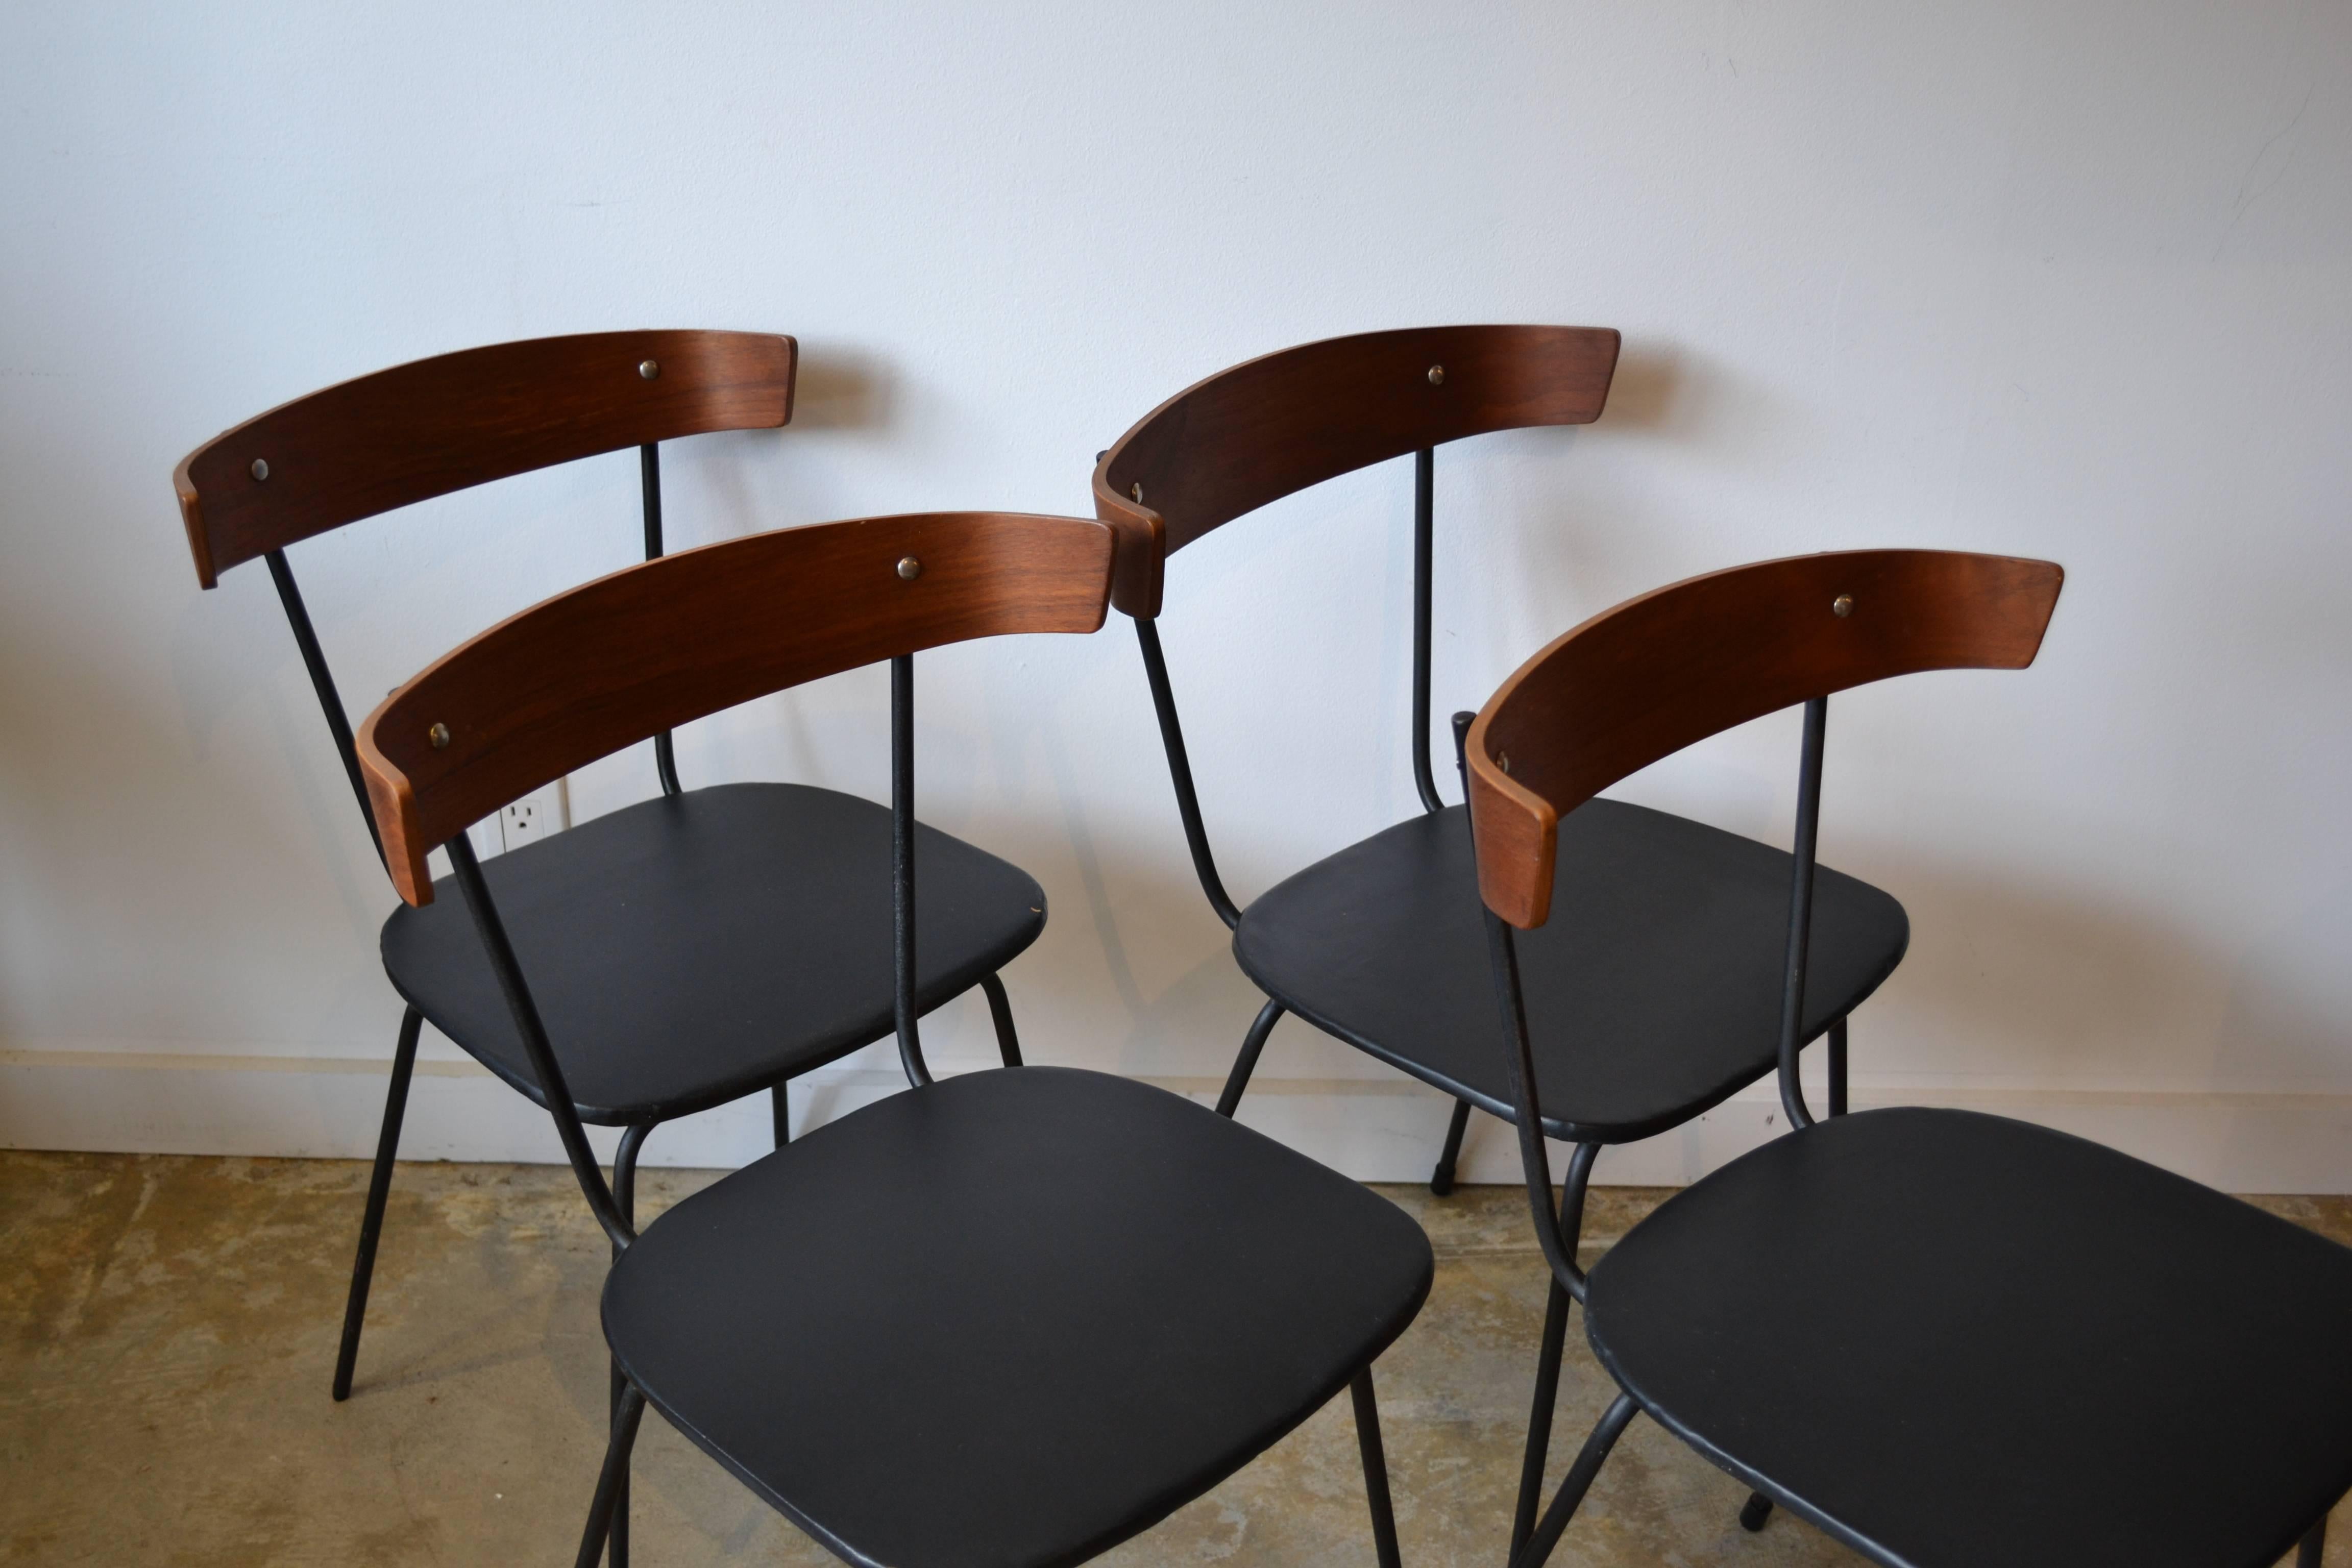 Four Mid-Century Modern iron and bentwood dining chairs in the style of Paul McCobb.